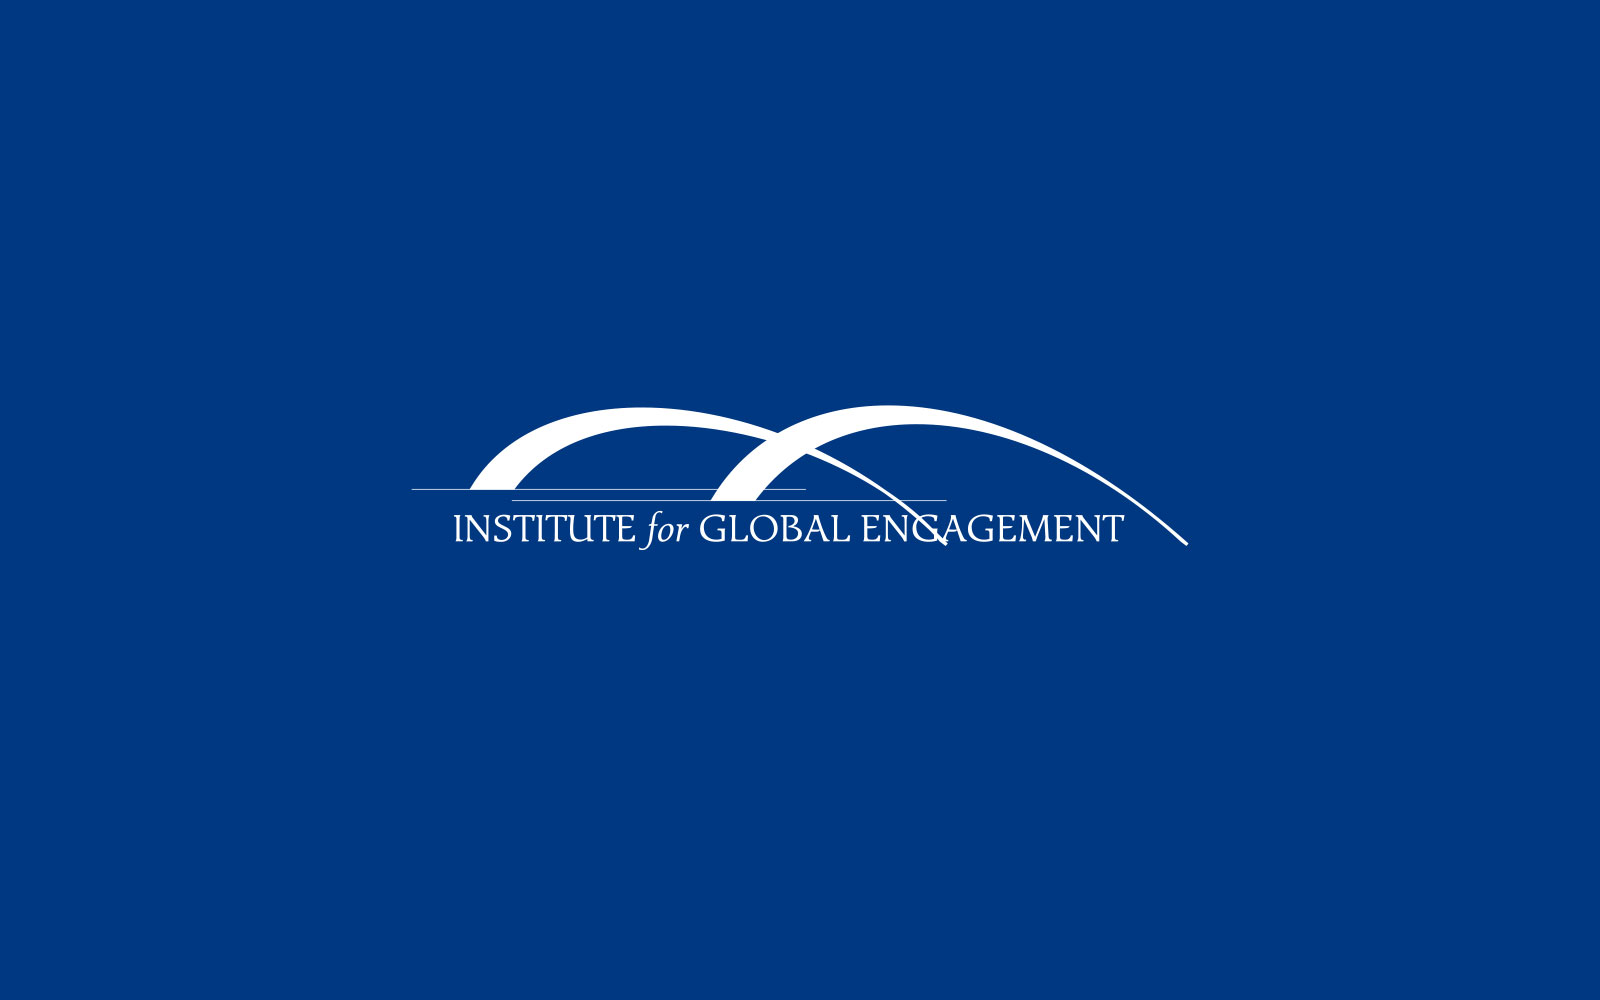 Institute for Global Engagement